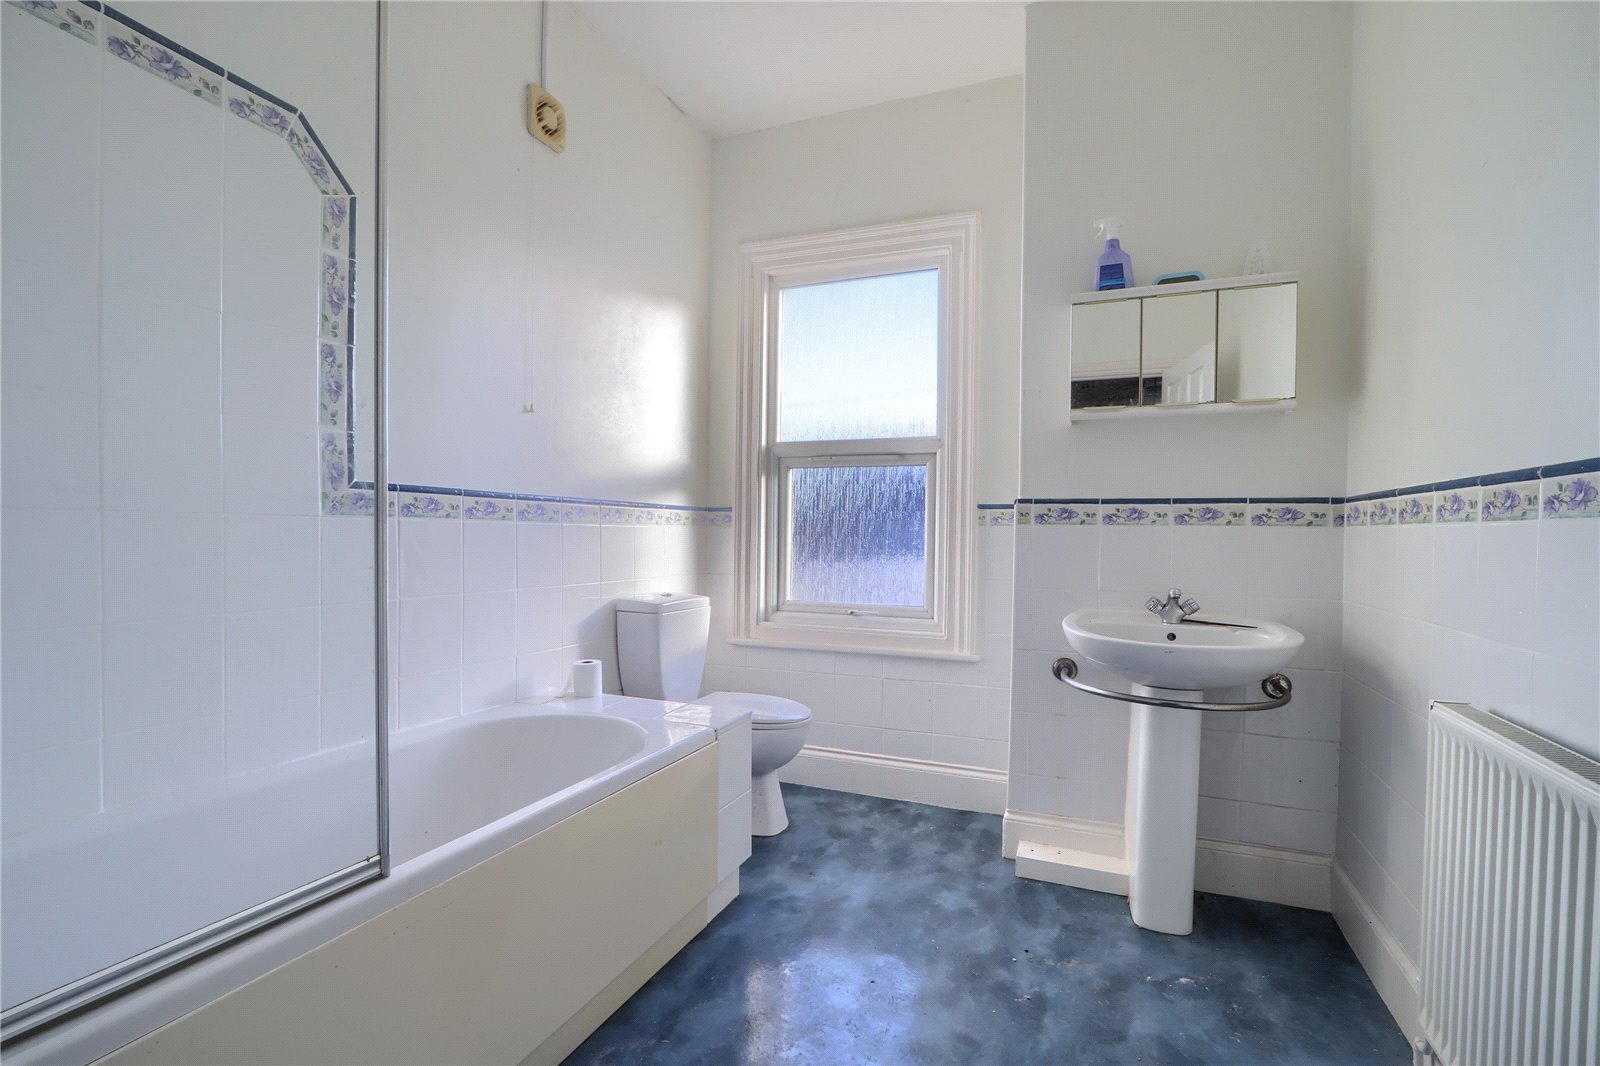 2 bed house for sale in Londonderry Road, Stockton-on-Tees  - Property Image 8